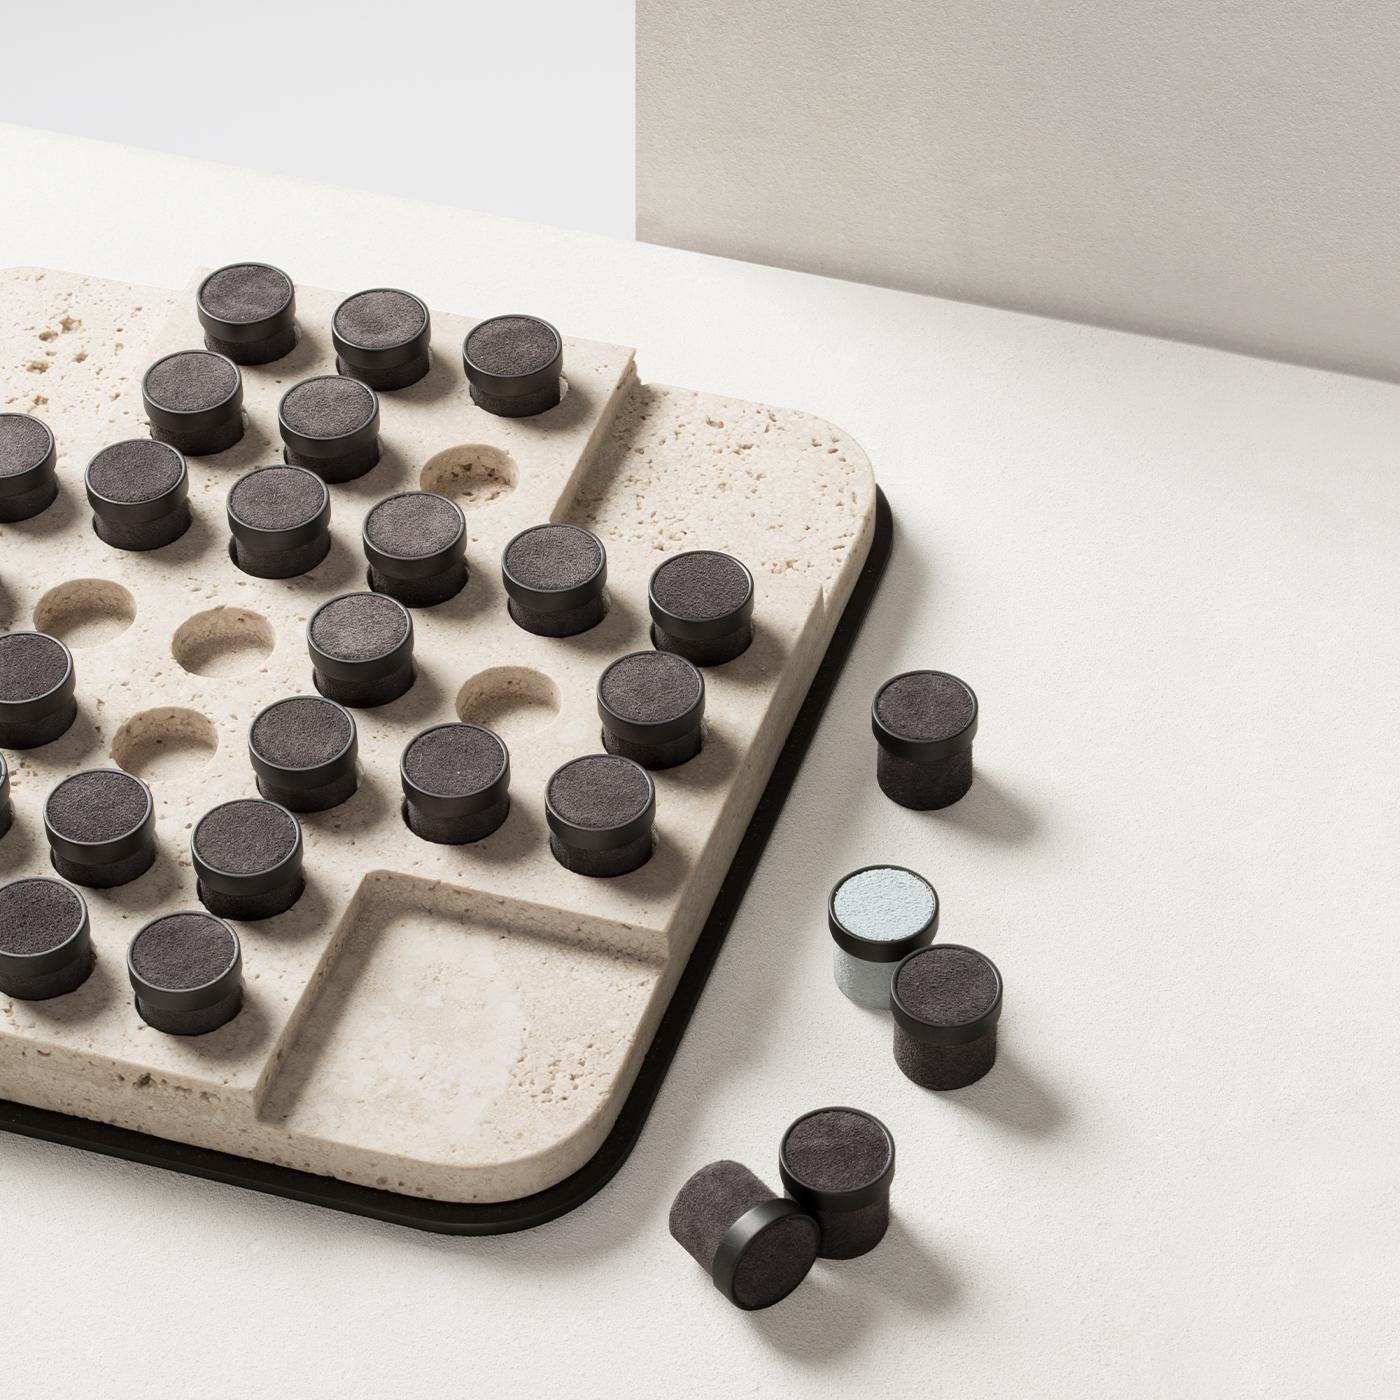 Marble playing field featuring a brushed bronze base. The set is equipped with pieces made of brushed bronze with leather inserts. Other marble finishes include arabescato white and travertino.